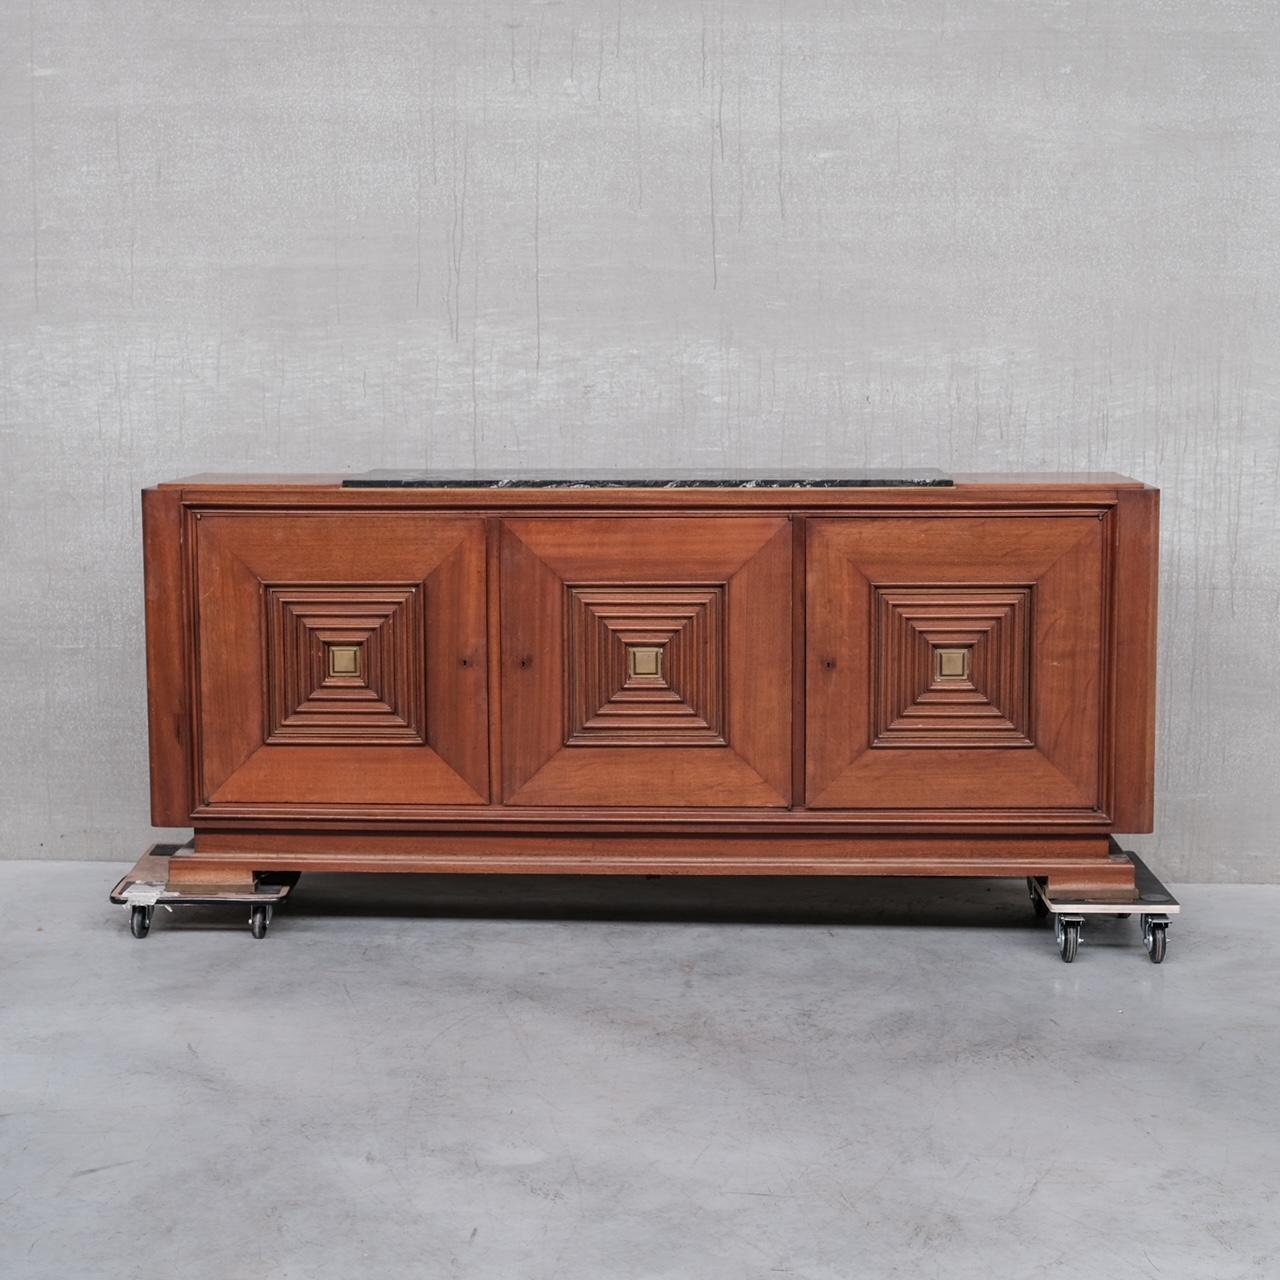 A large sideboard or credenza in the manner of Maxime Old. 

France, c1940s. 

Original marble top retained but it has a large crack running through it, the price include replacement of the marble with a suitable replacement, either white or black